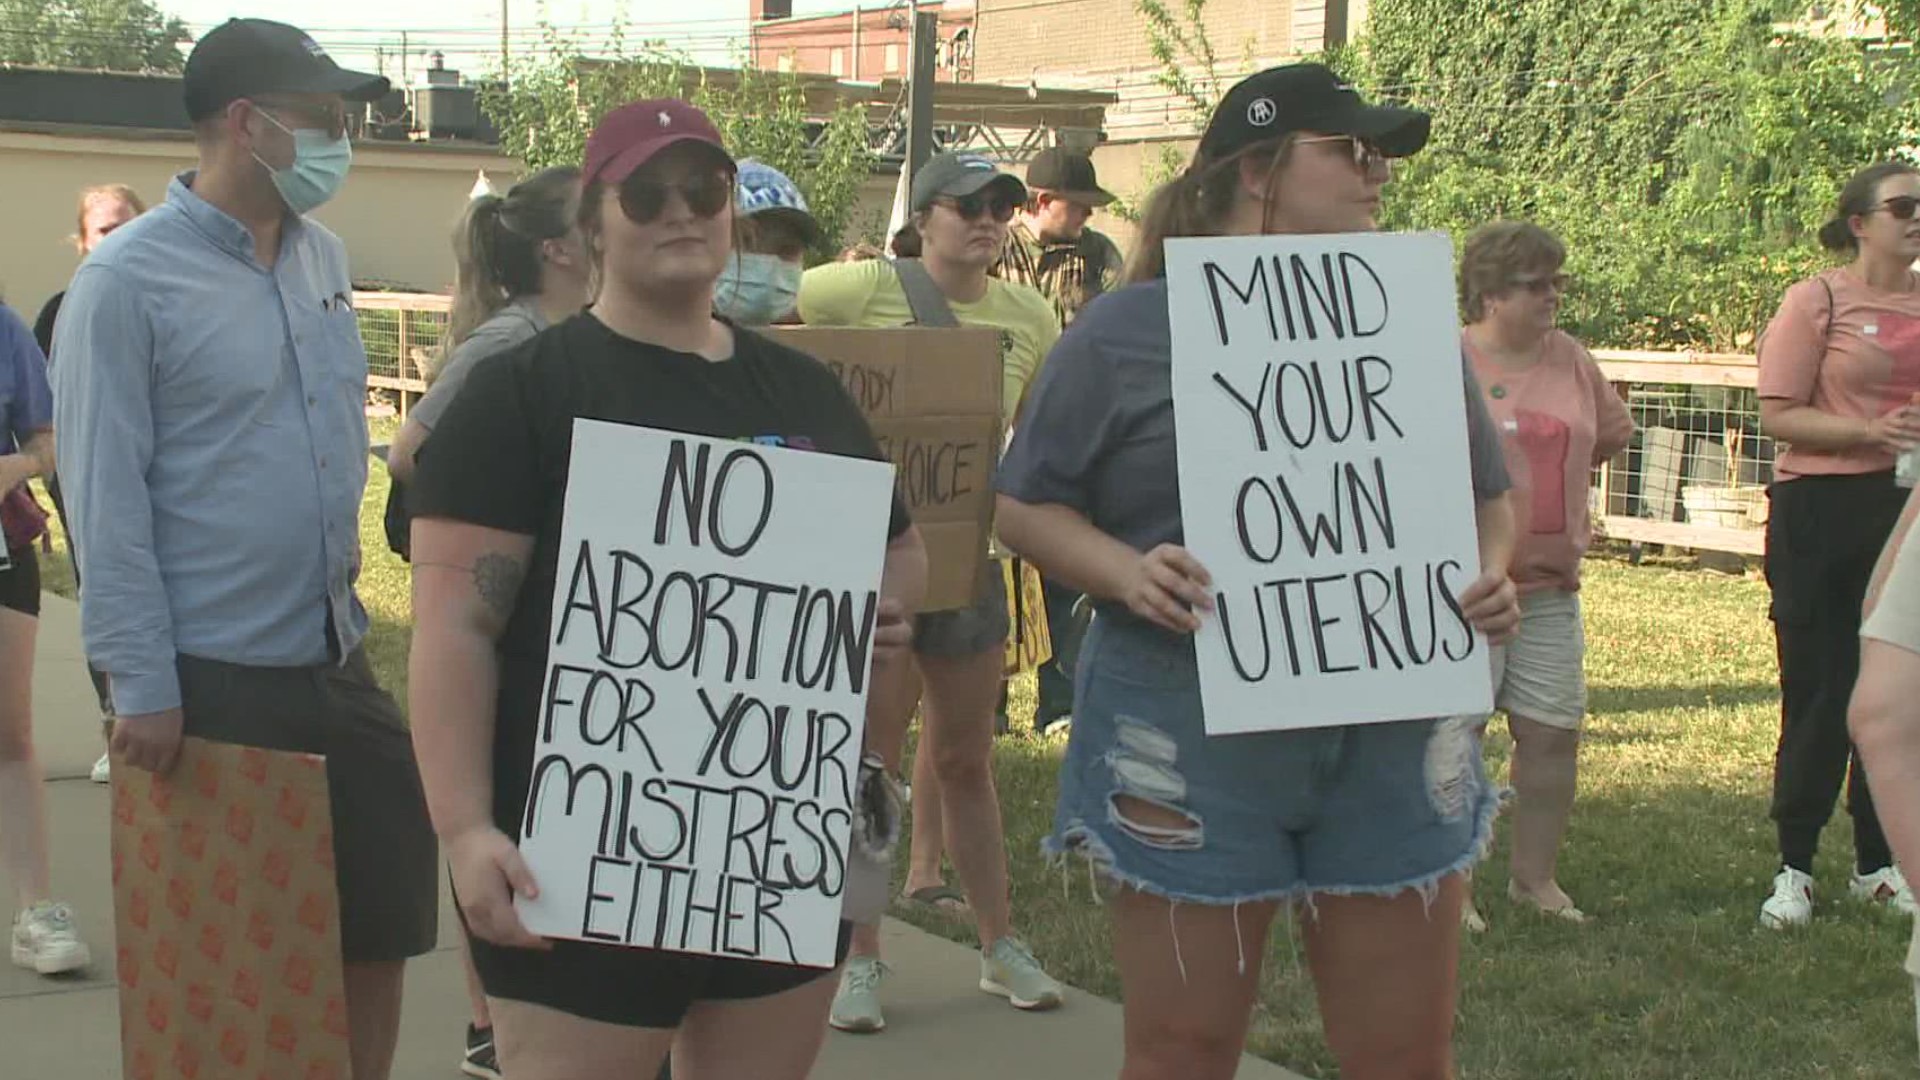 Dozens of abortion rights supporters didn't say a word during their demonstration in the heart of downtown Belleville. Instead, they let their signs speak for them.